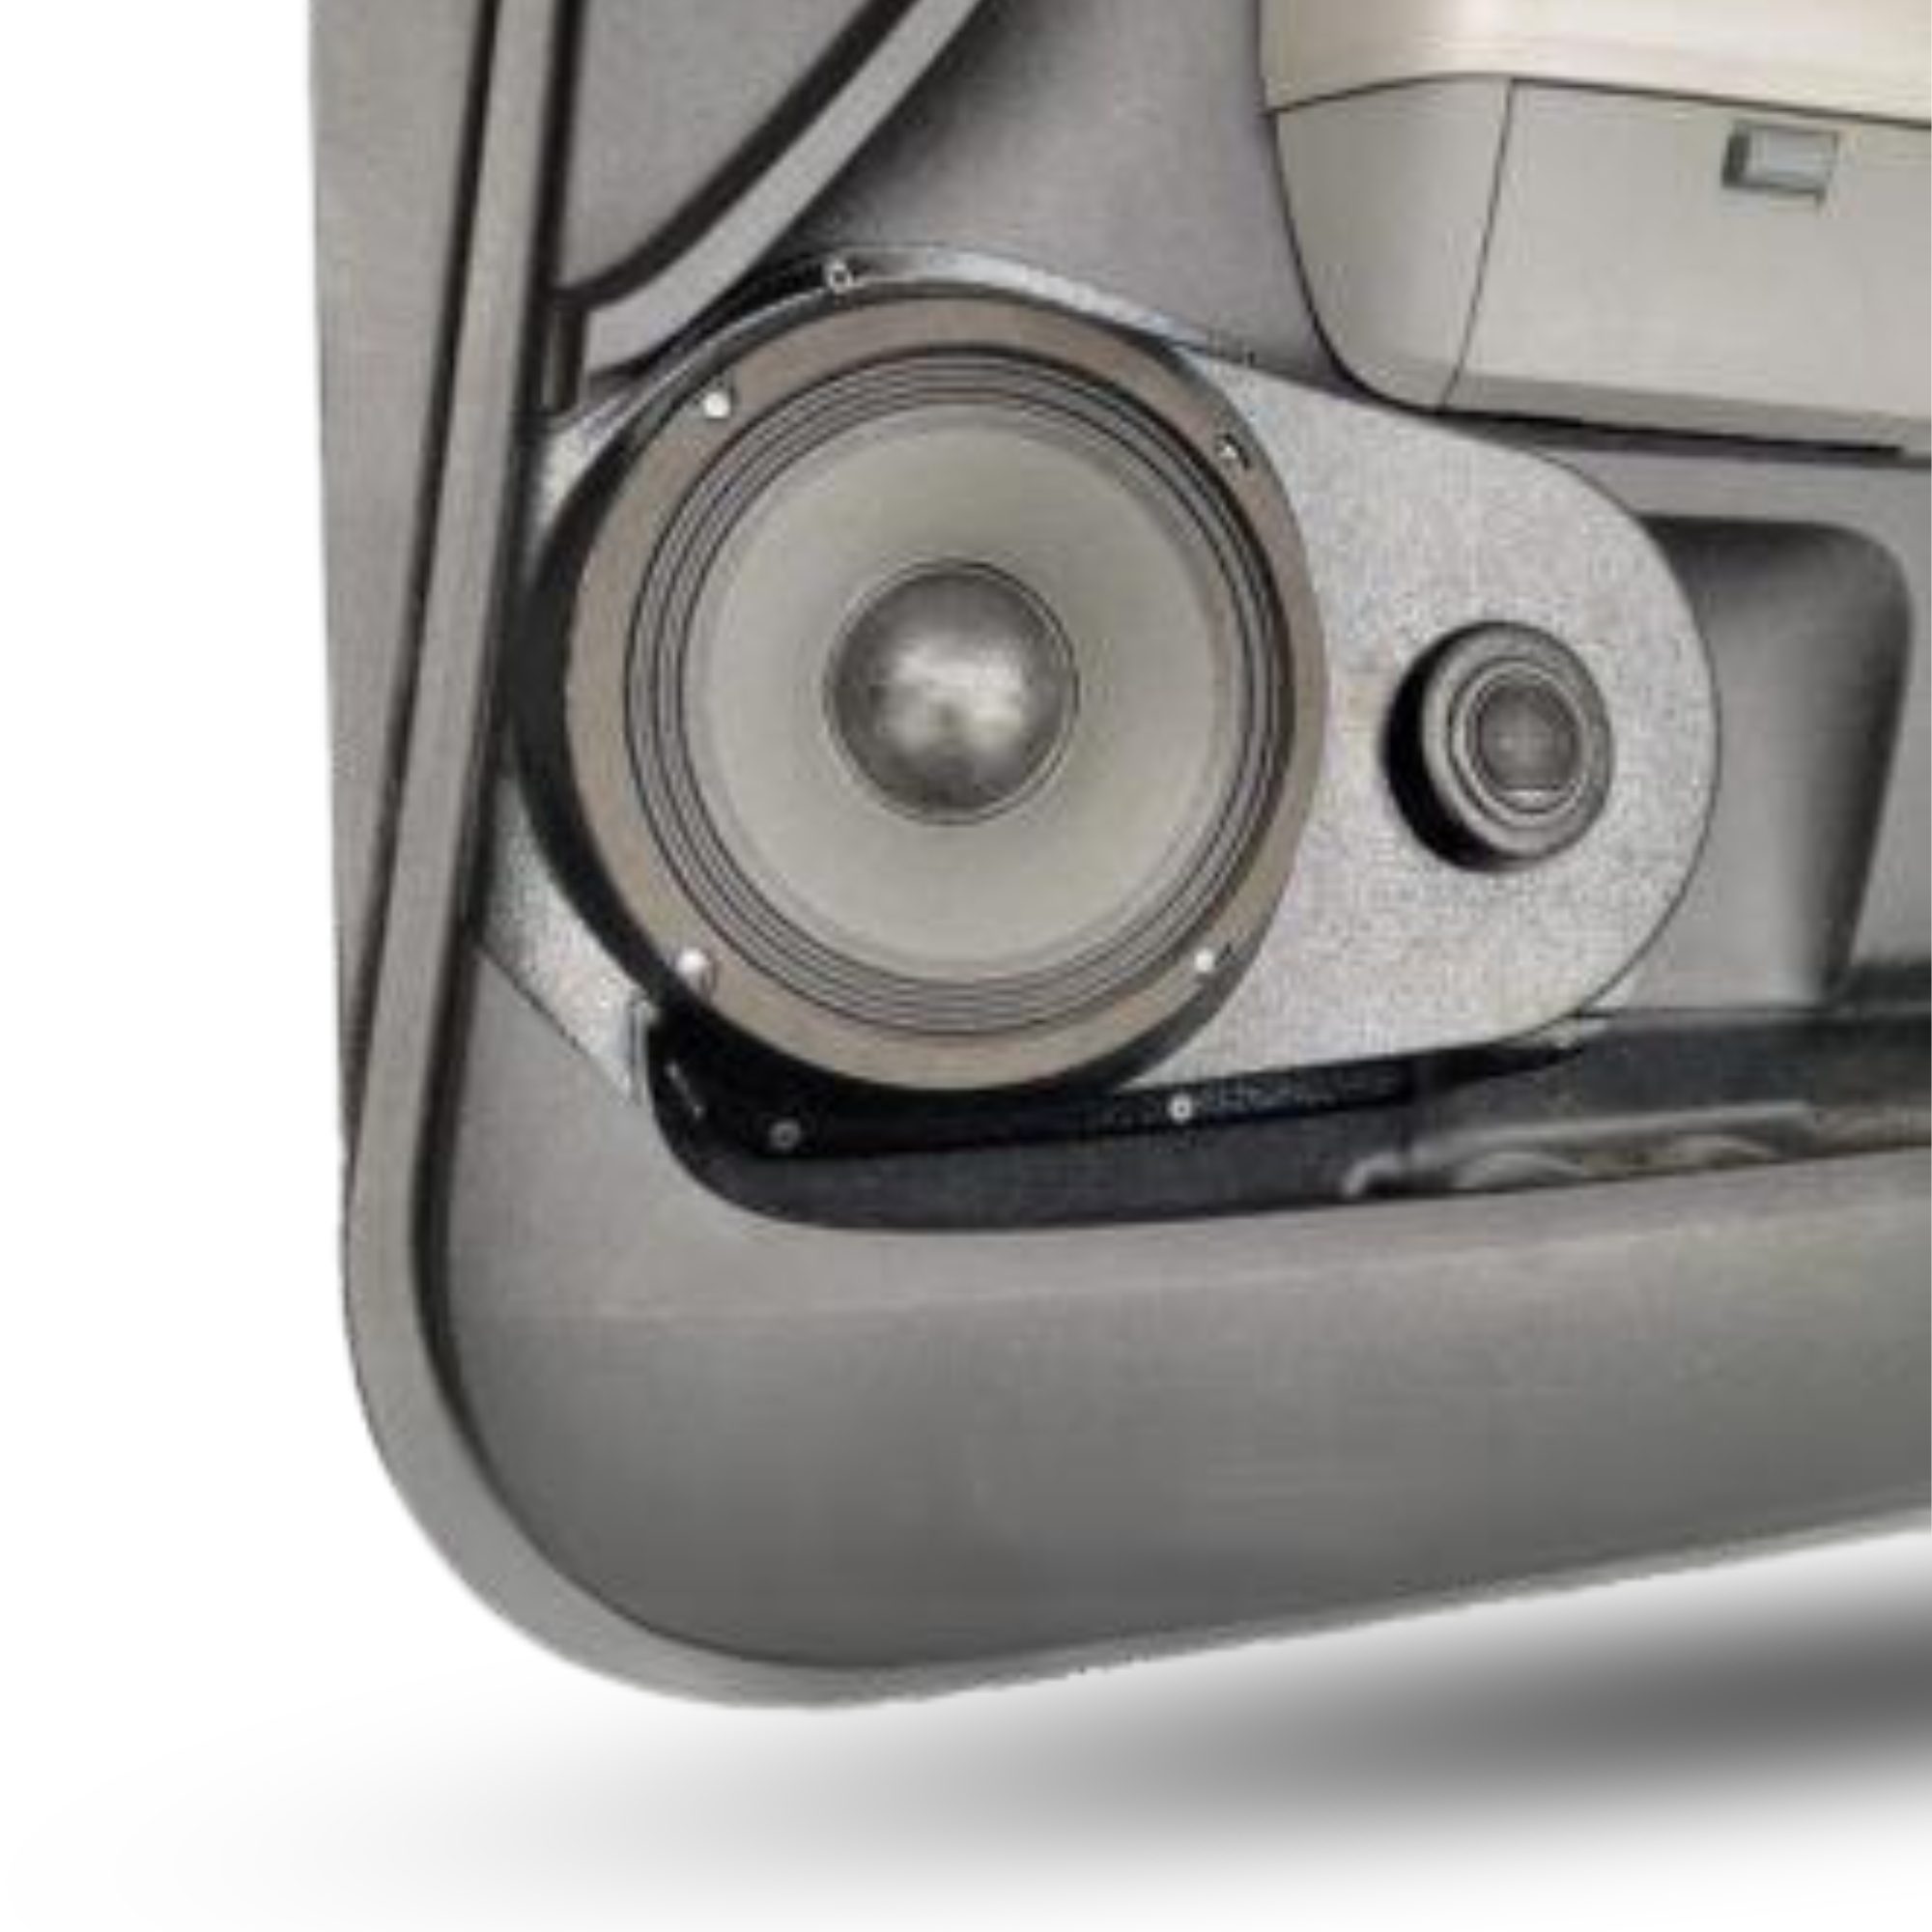 Single 8.00 in + Single Tweeter Speaker Pods compatible with the Front Door of a 07-13 Toyota Tundra